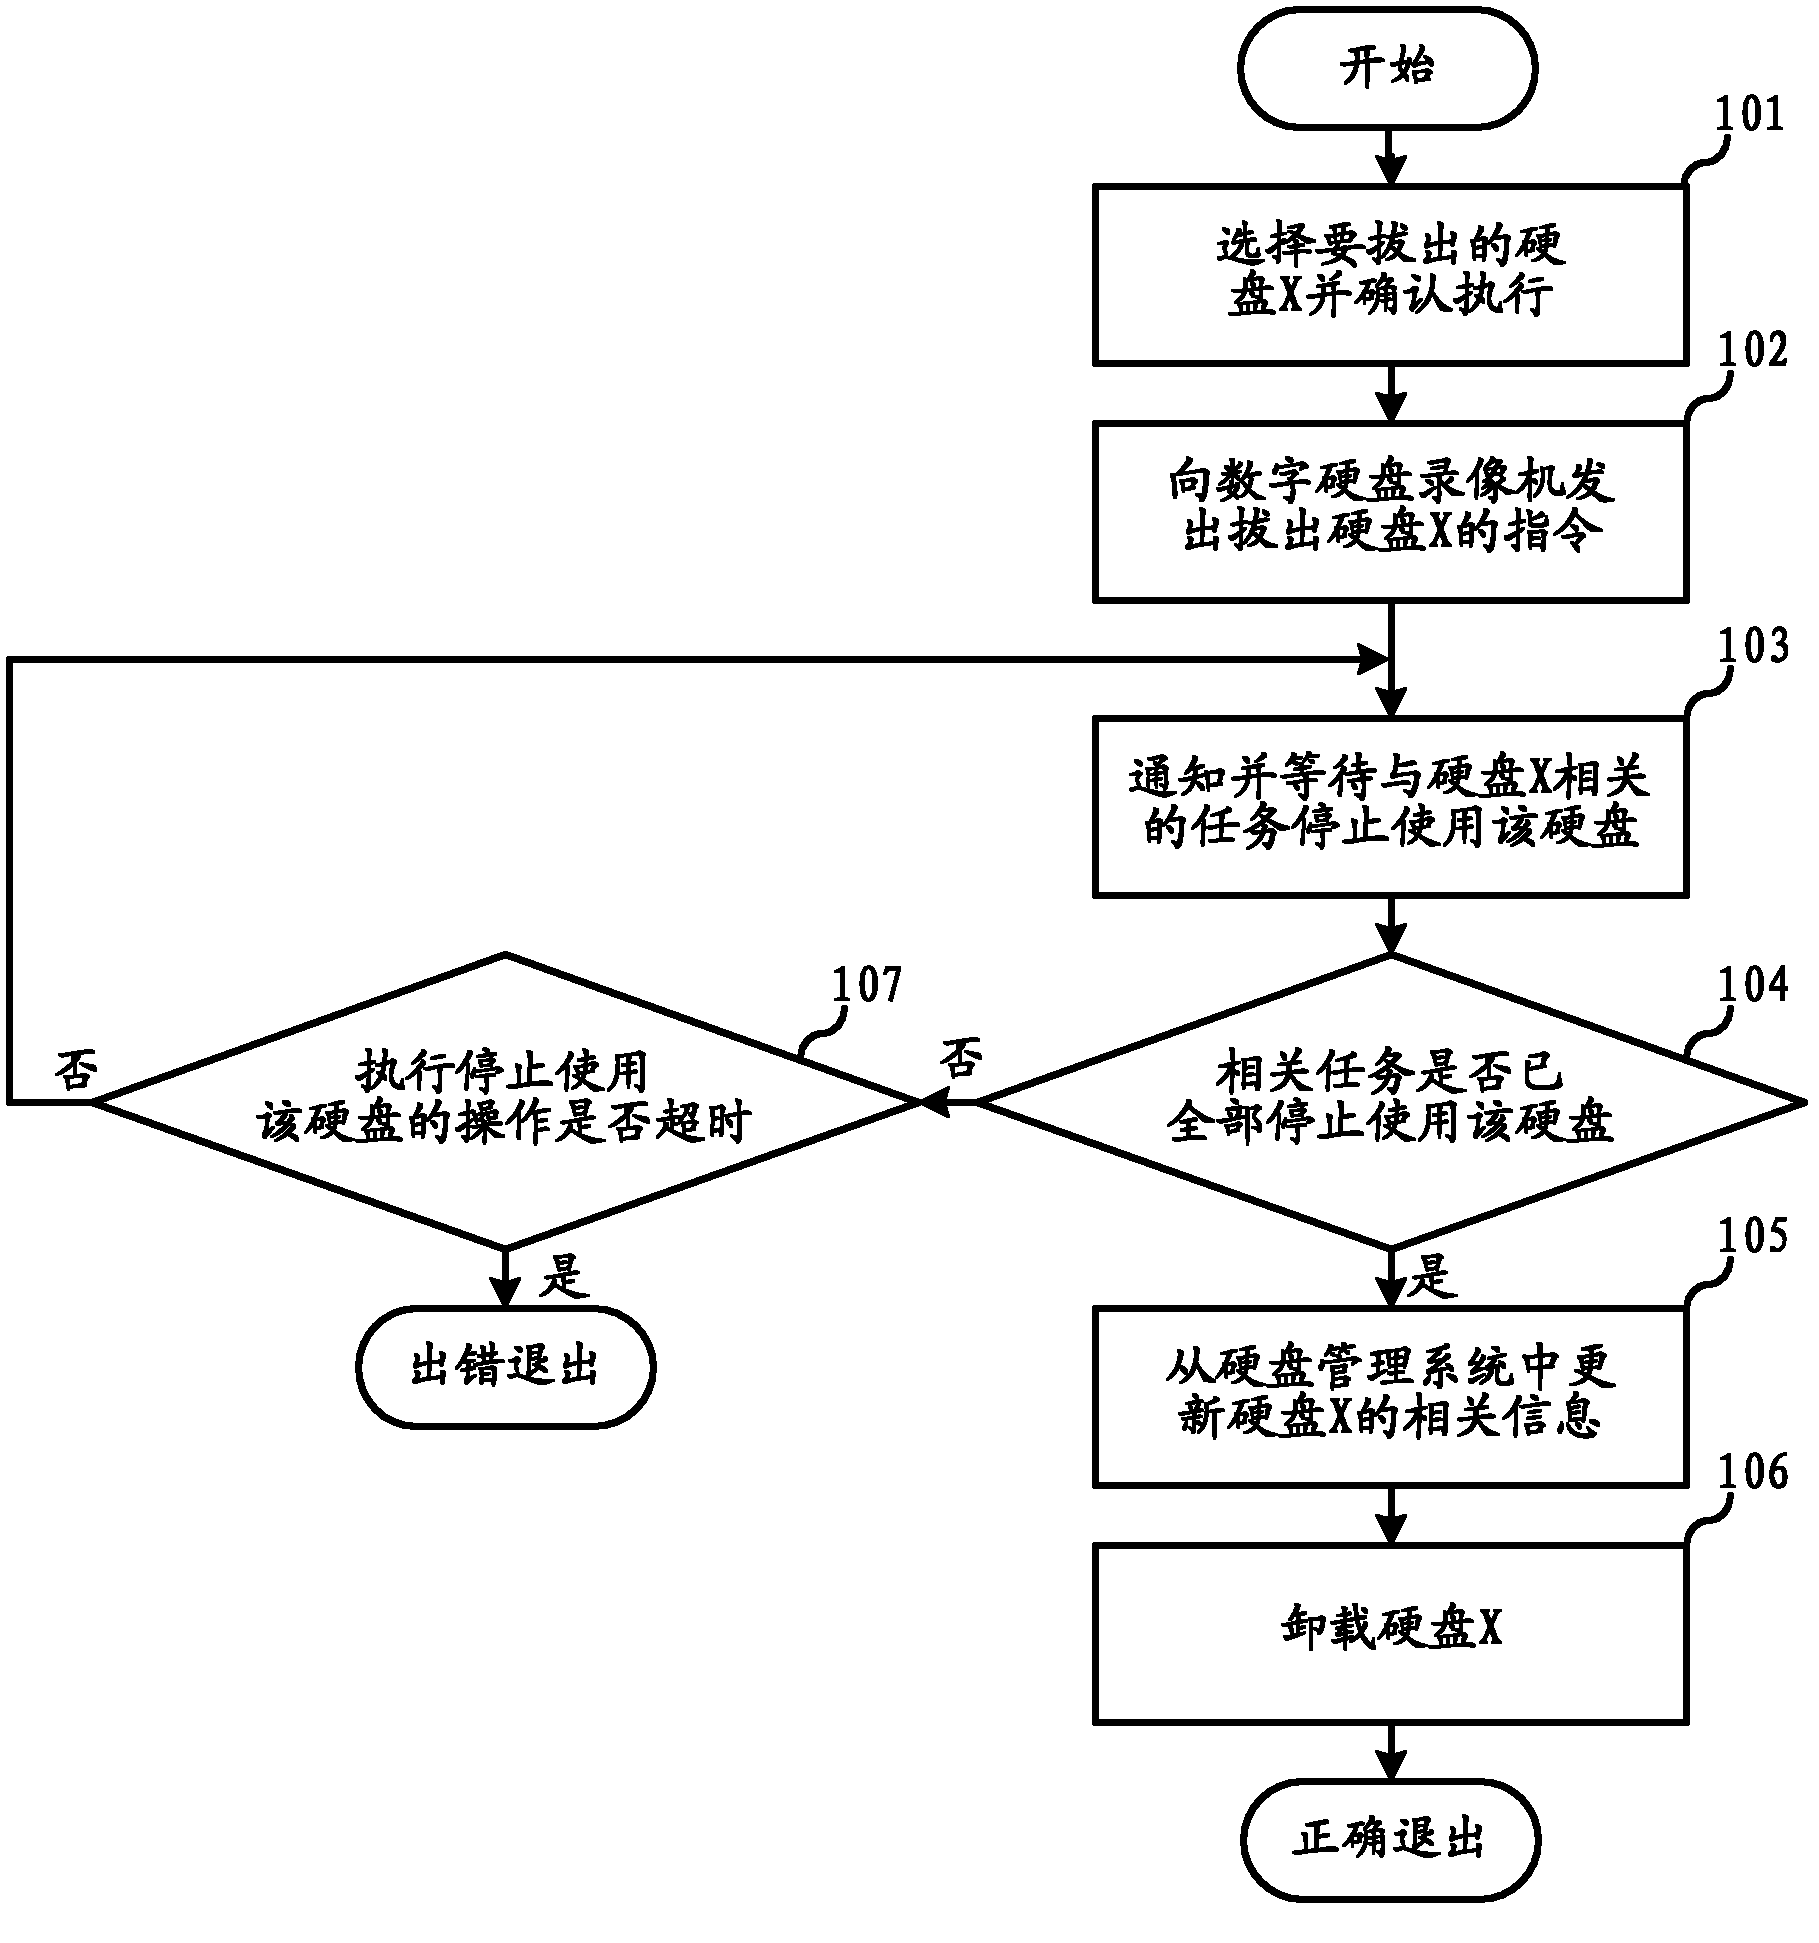 Method and device for carrying out charged uninstallation and installation of hard disk for digital video recorder